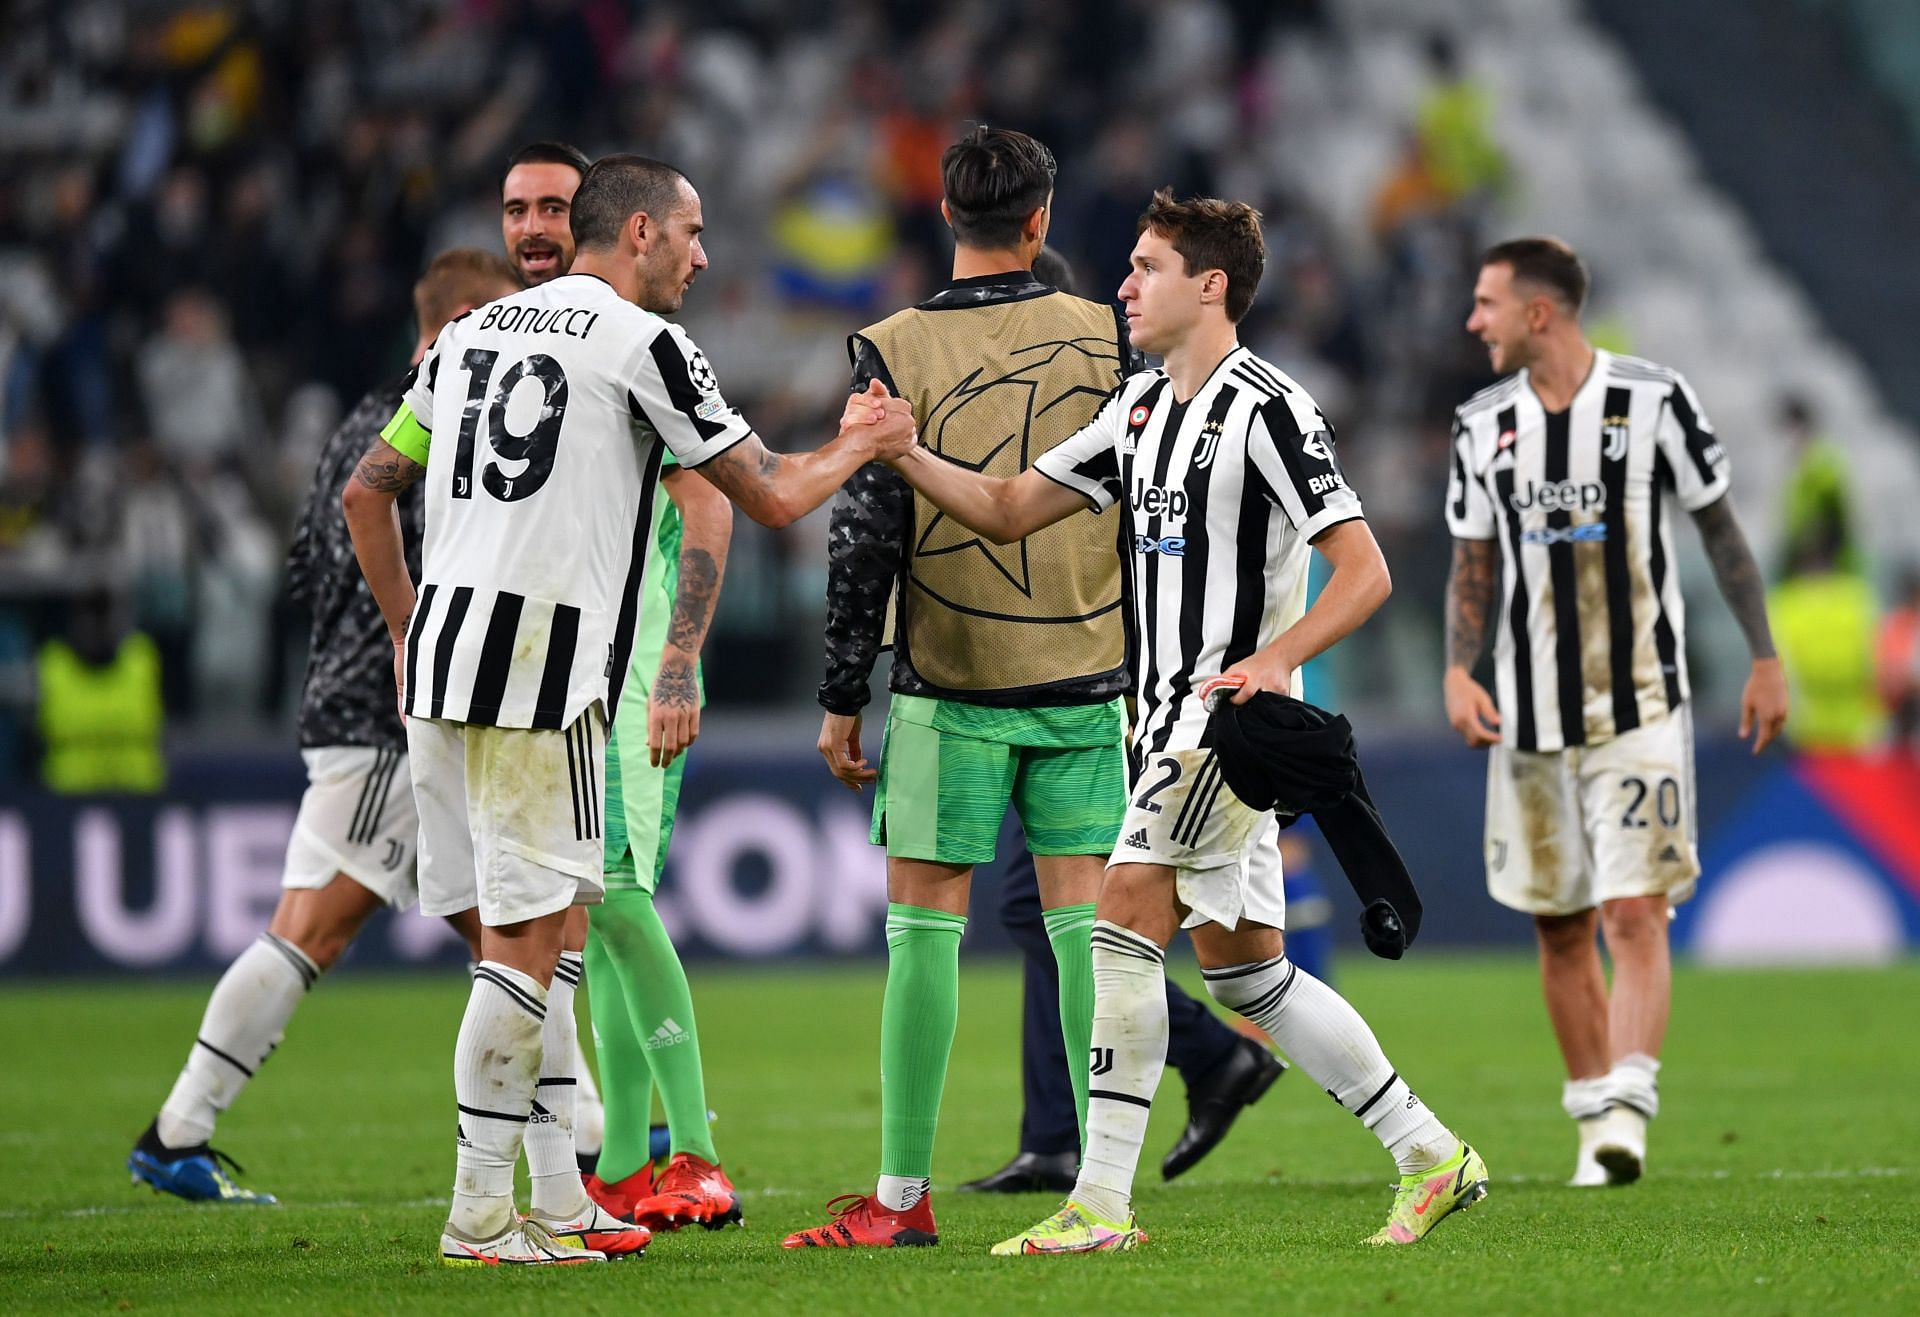 Juventus host Sassuolo in their upcoming midweek Serie A fixture on Wednesday